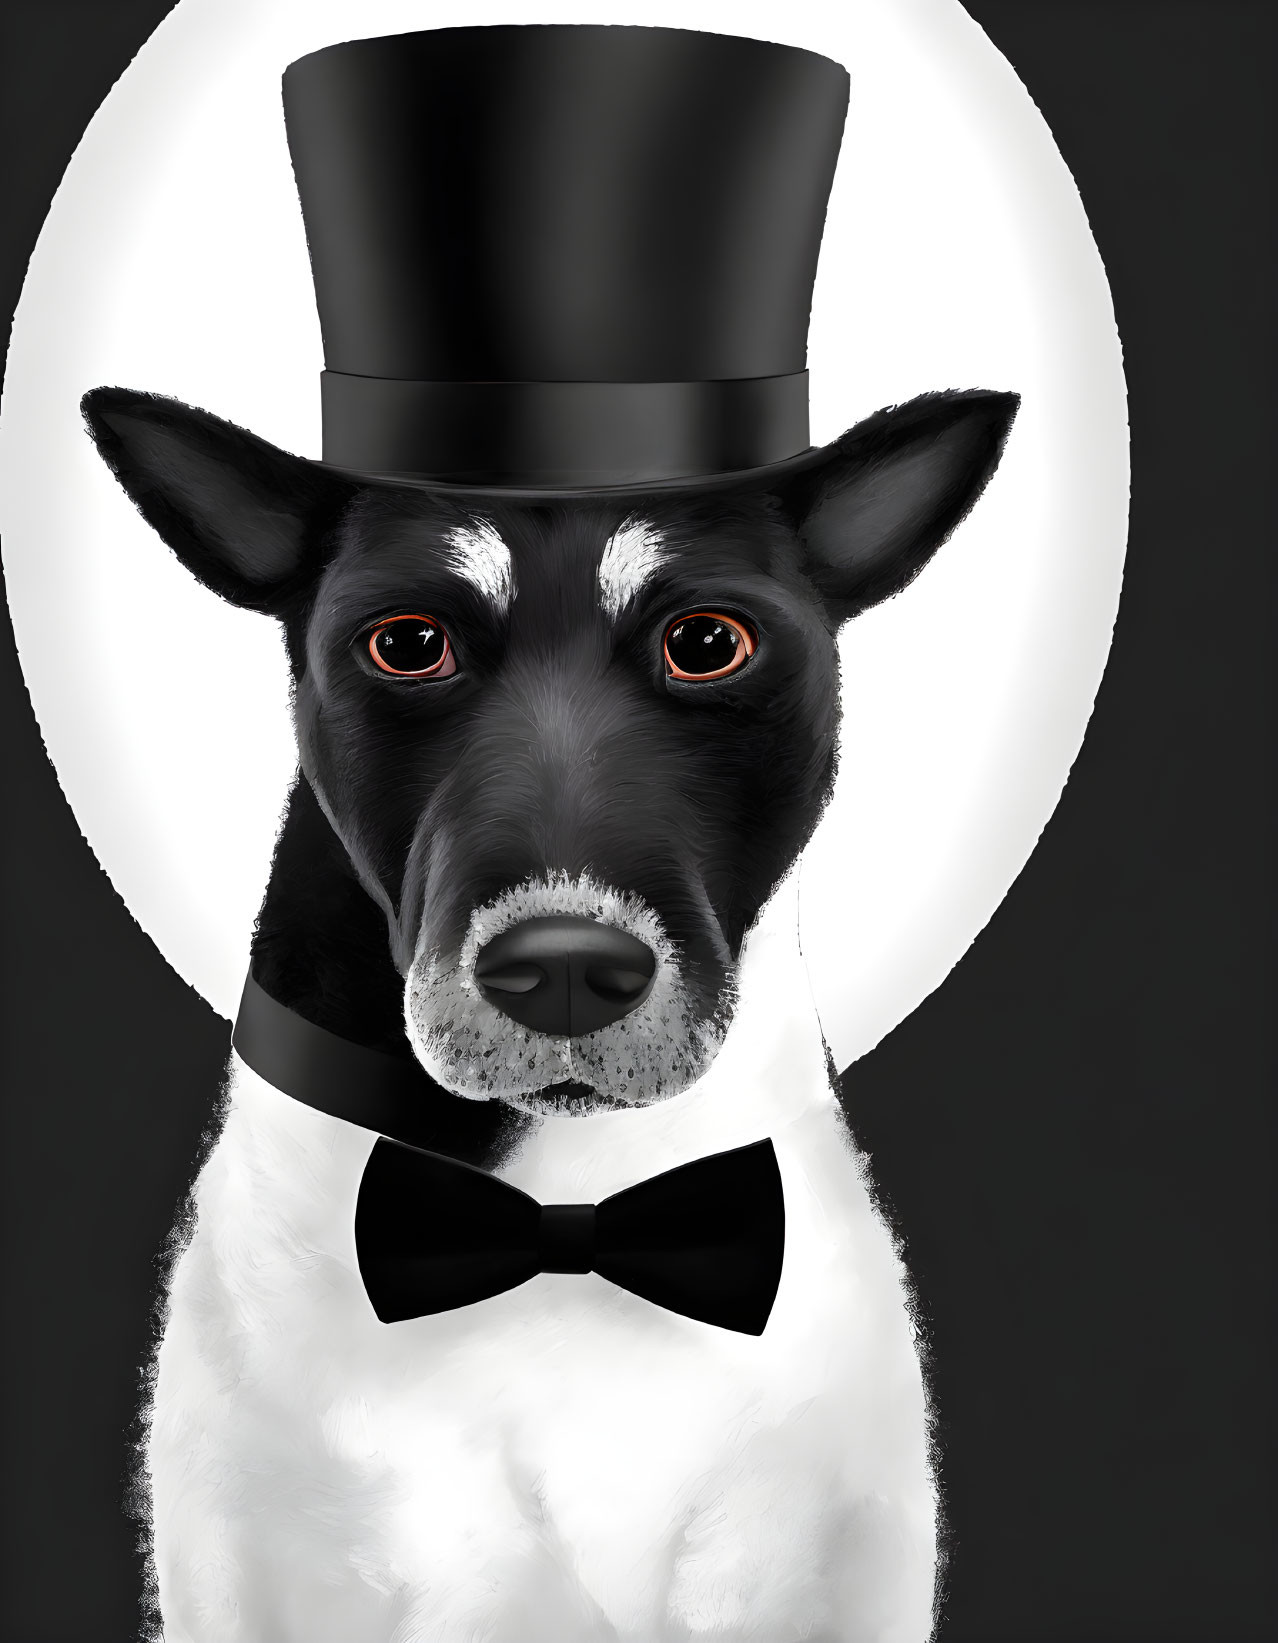 Dog with Tophat